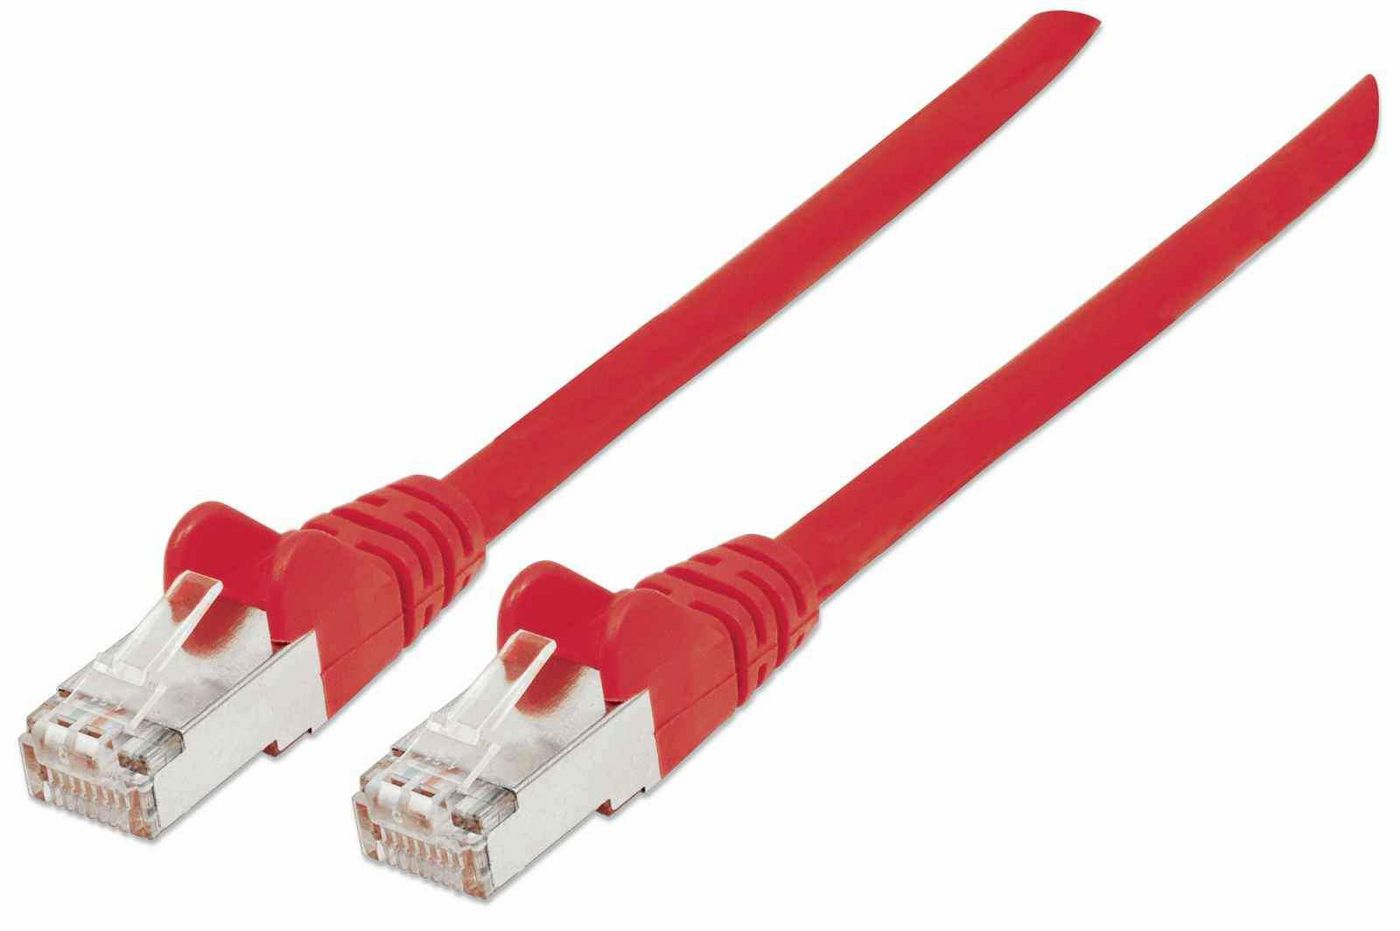 Intellinet 740883 High Performance Network Cable 